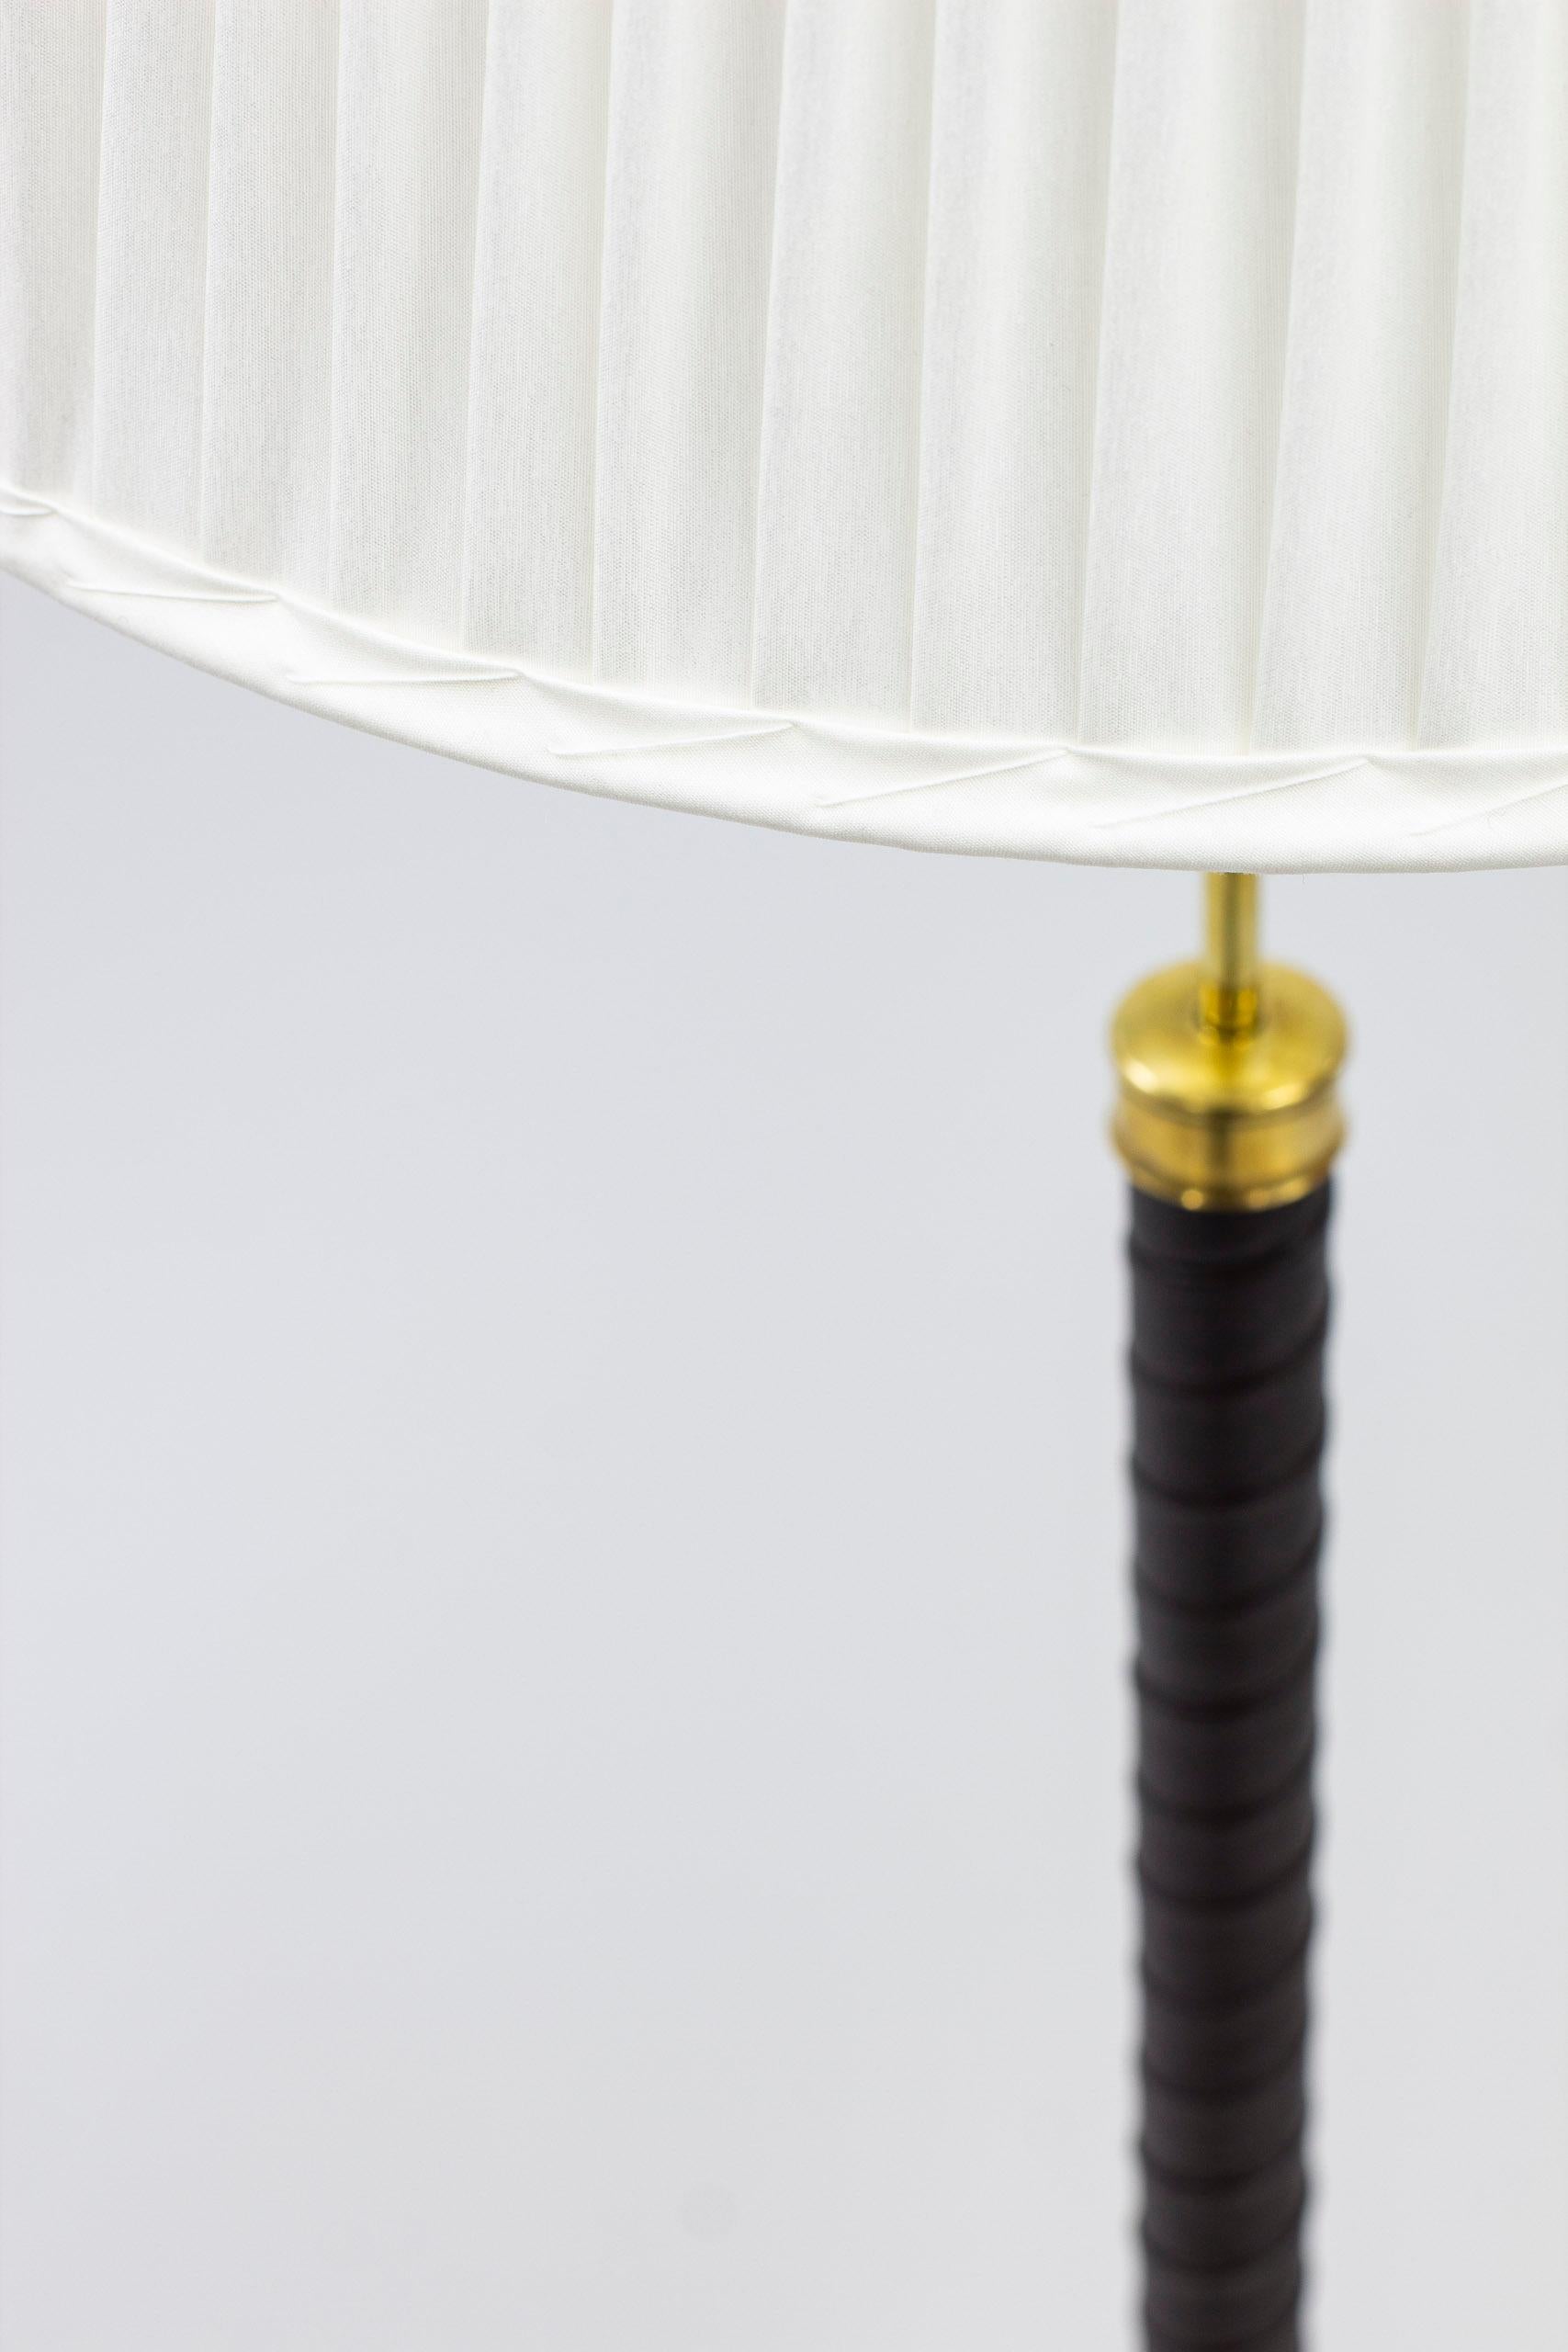 Mid-20th Century Floor Lamp in Brass and Leather by ASEA, Sweden, 1940s